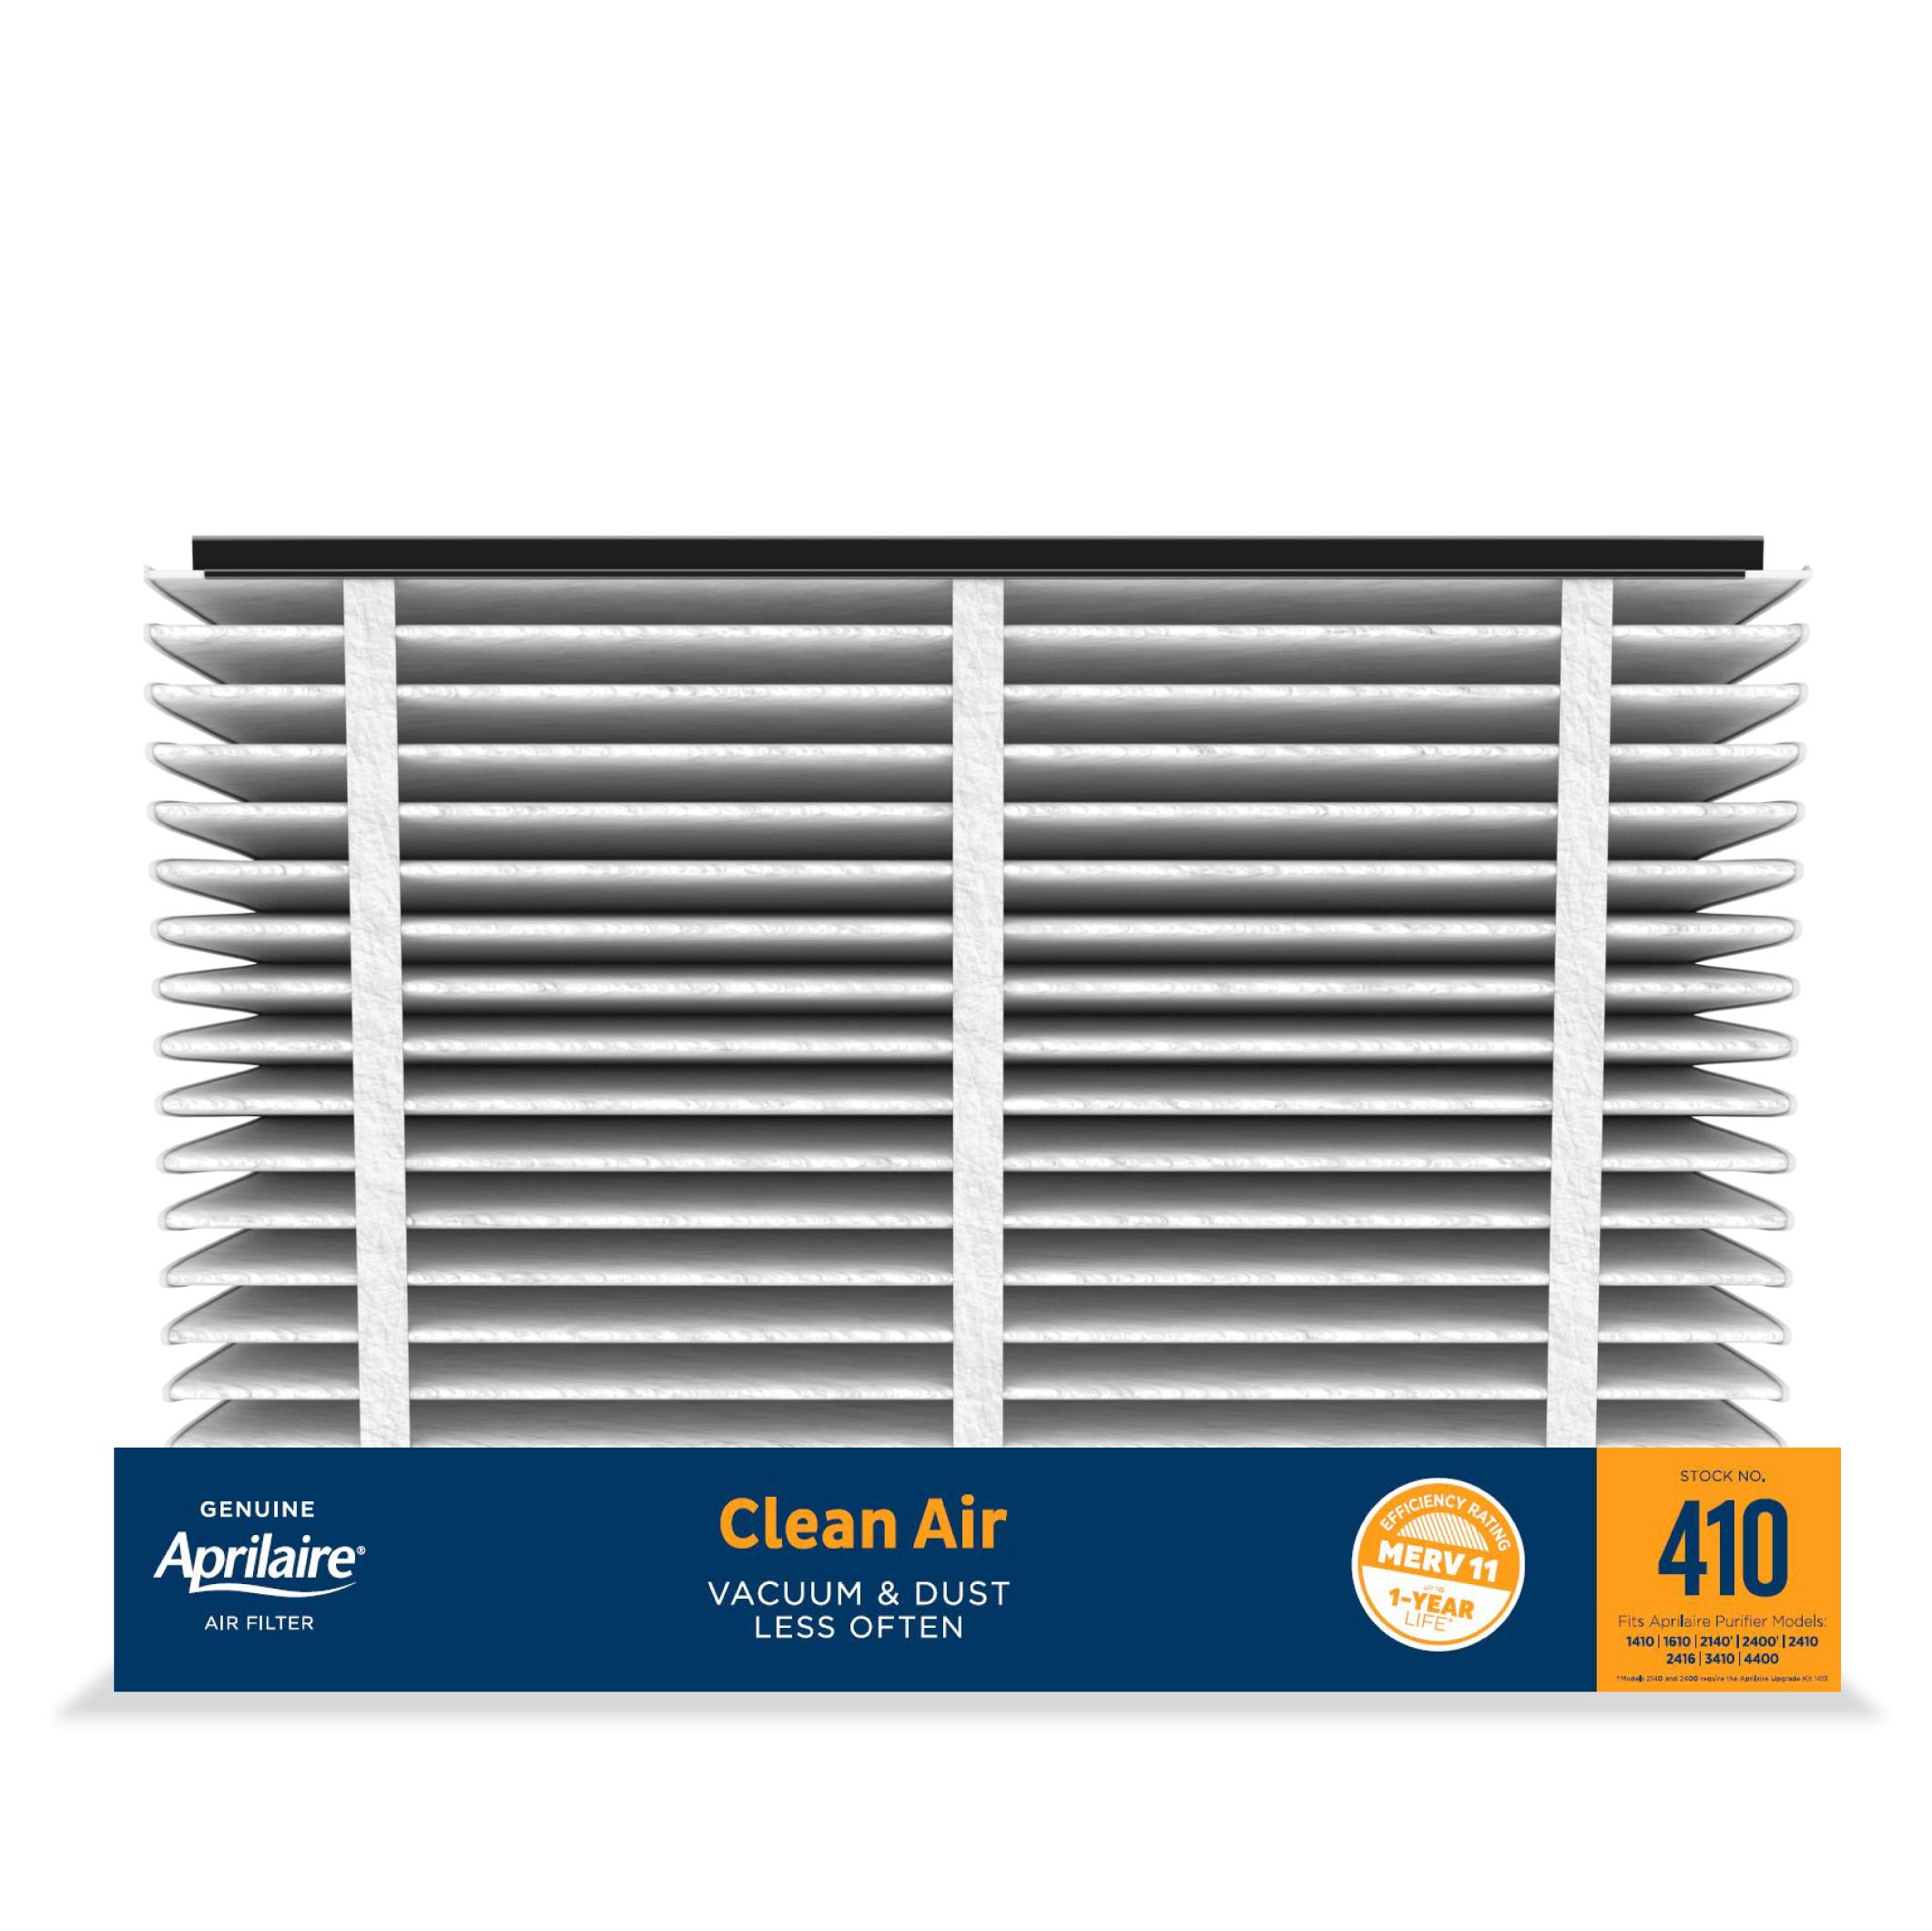 Aprilaire 410 Replacement Furnace Air Filter for Whole Home Air Purifiers